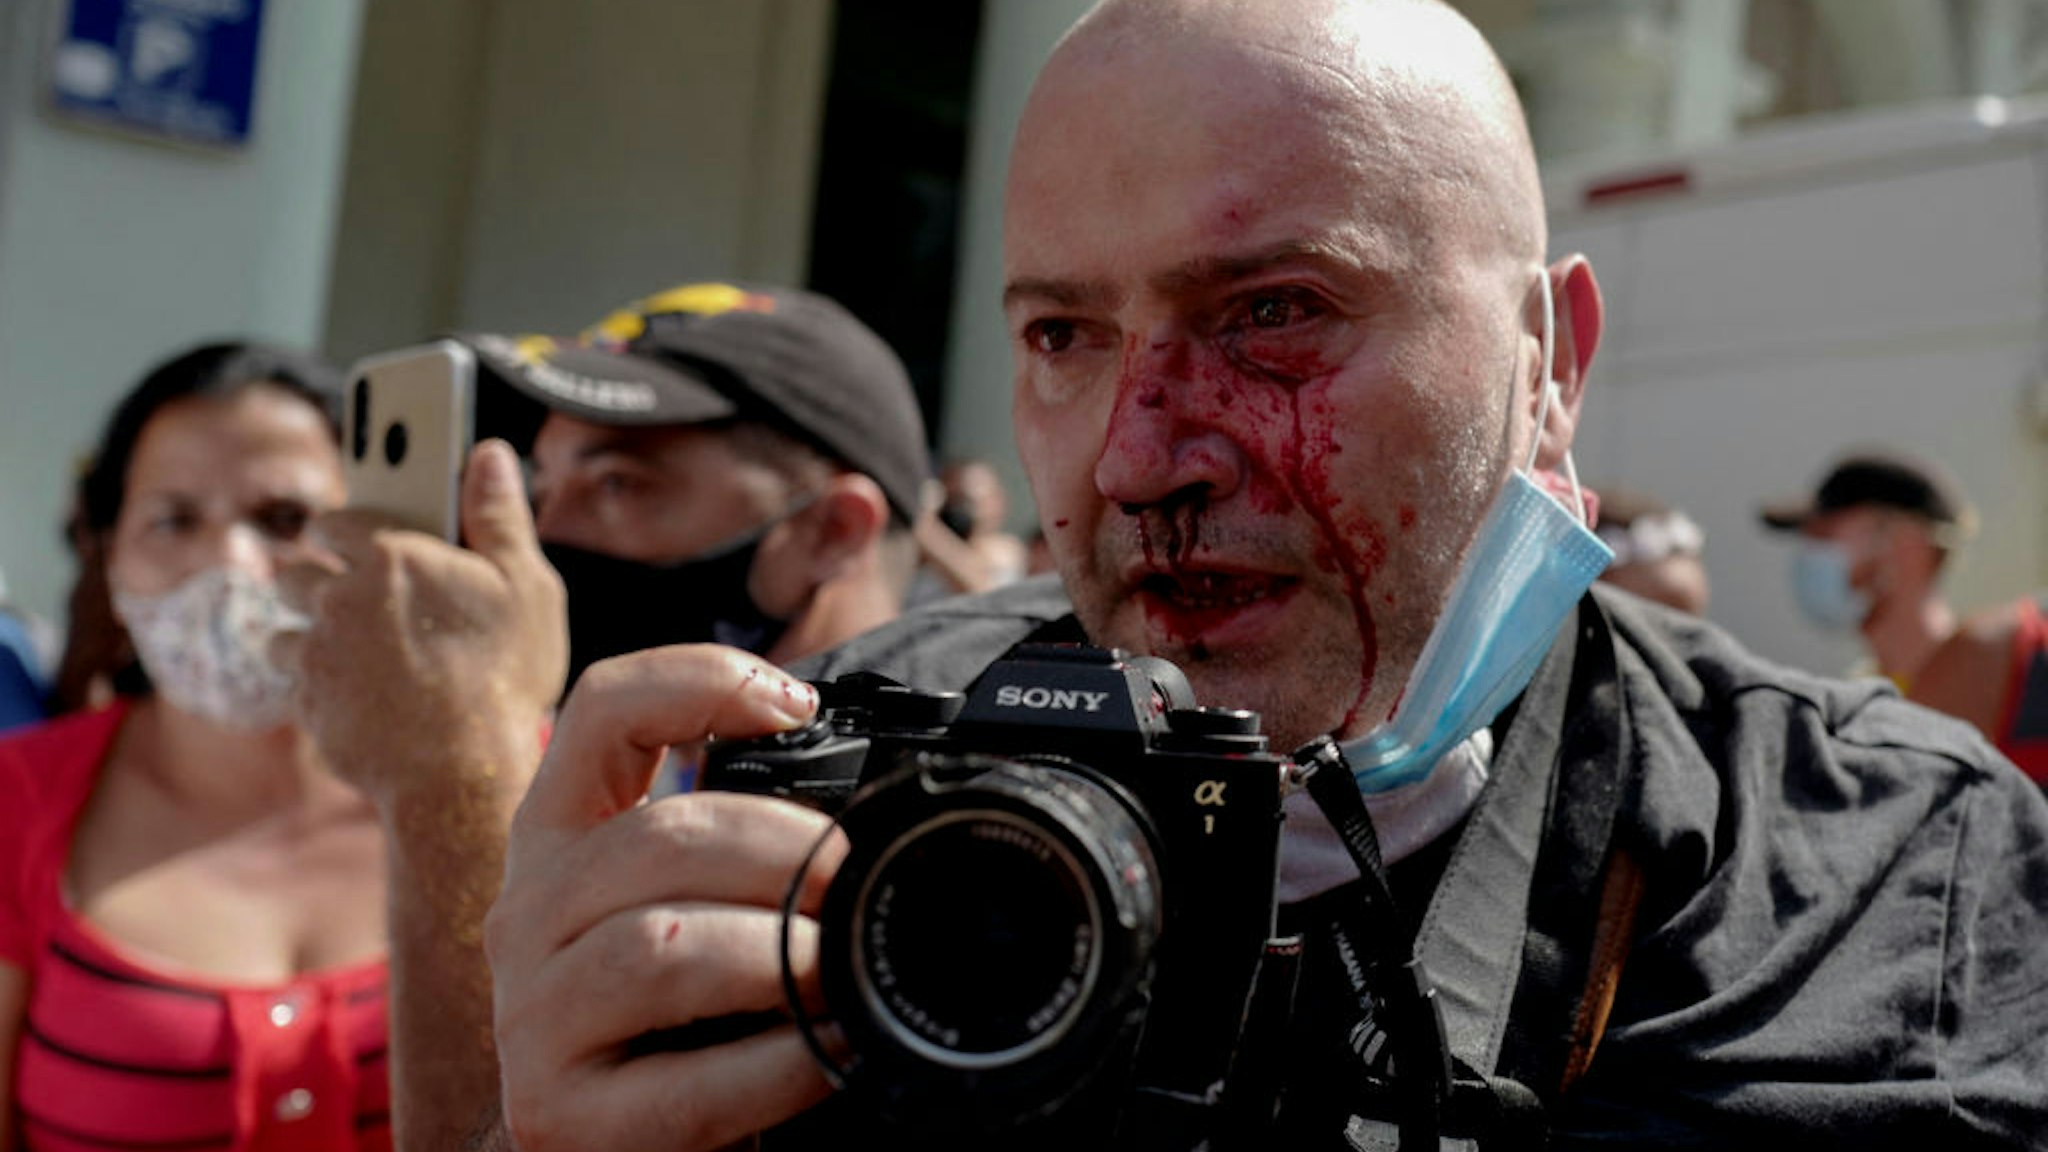 AP photographer, Spanish Ramon Espinosa, is seen with injuries in his face while covering a demonstration against Cuban President Miguel Diaz-Canel in Havana, on July 11, 2021